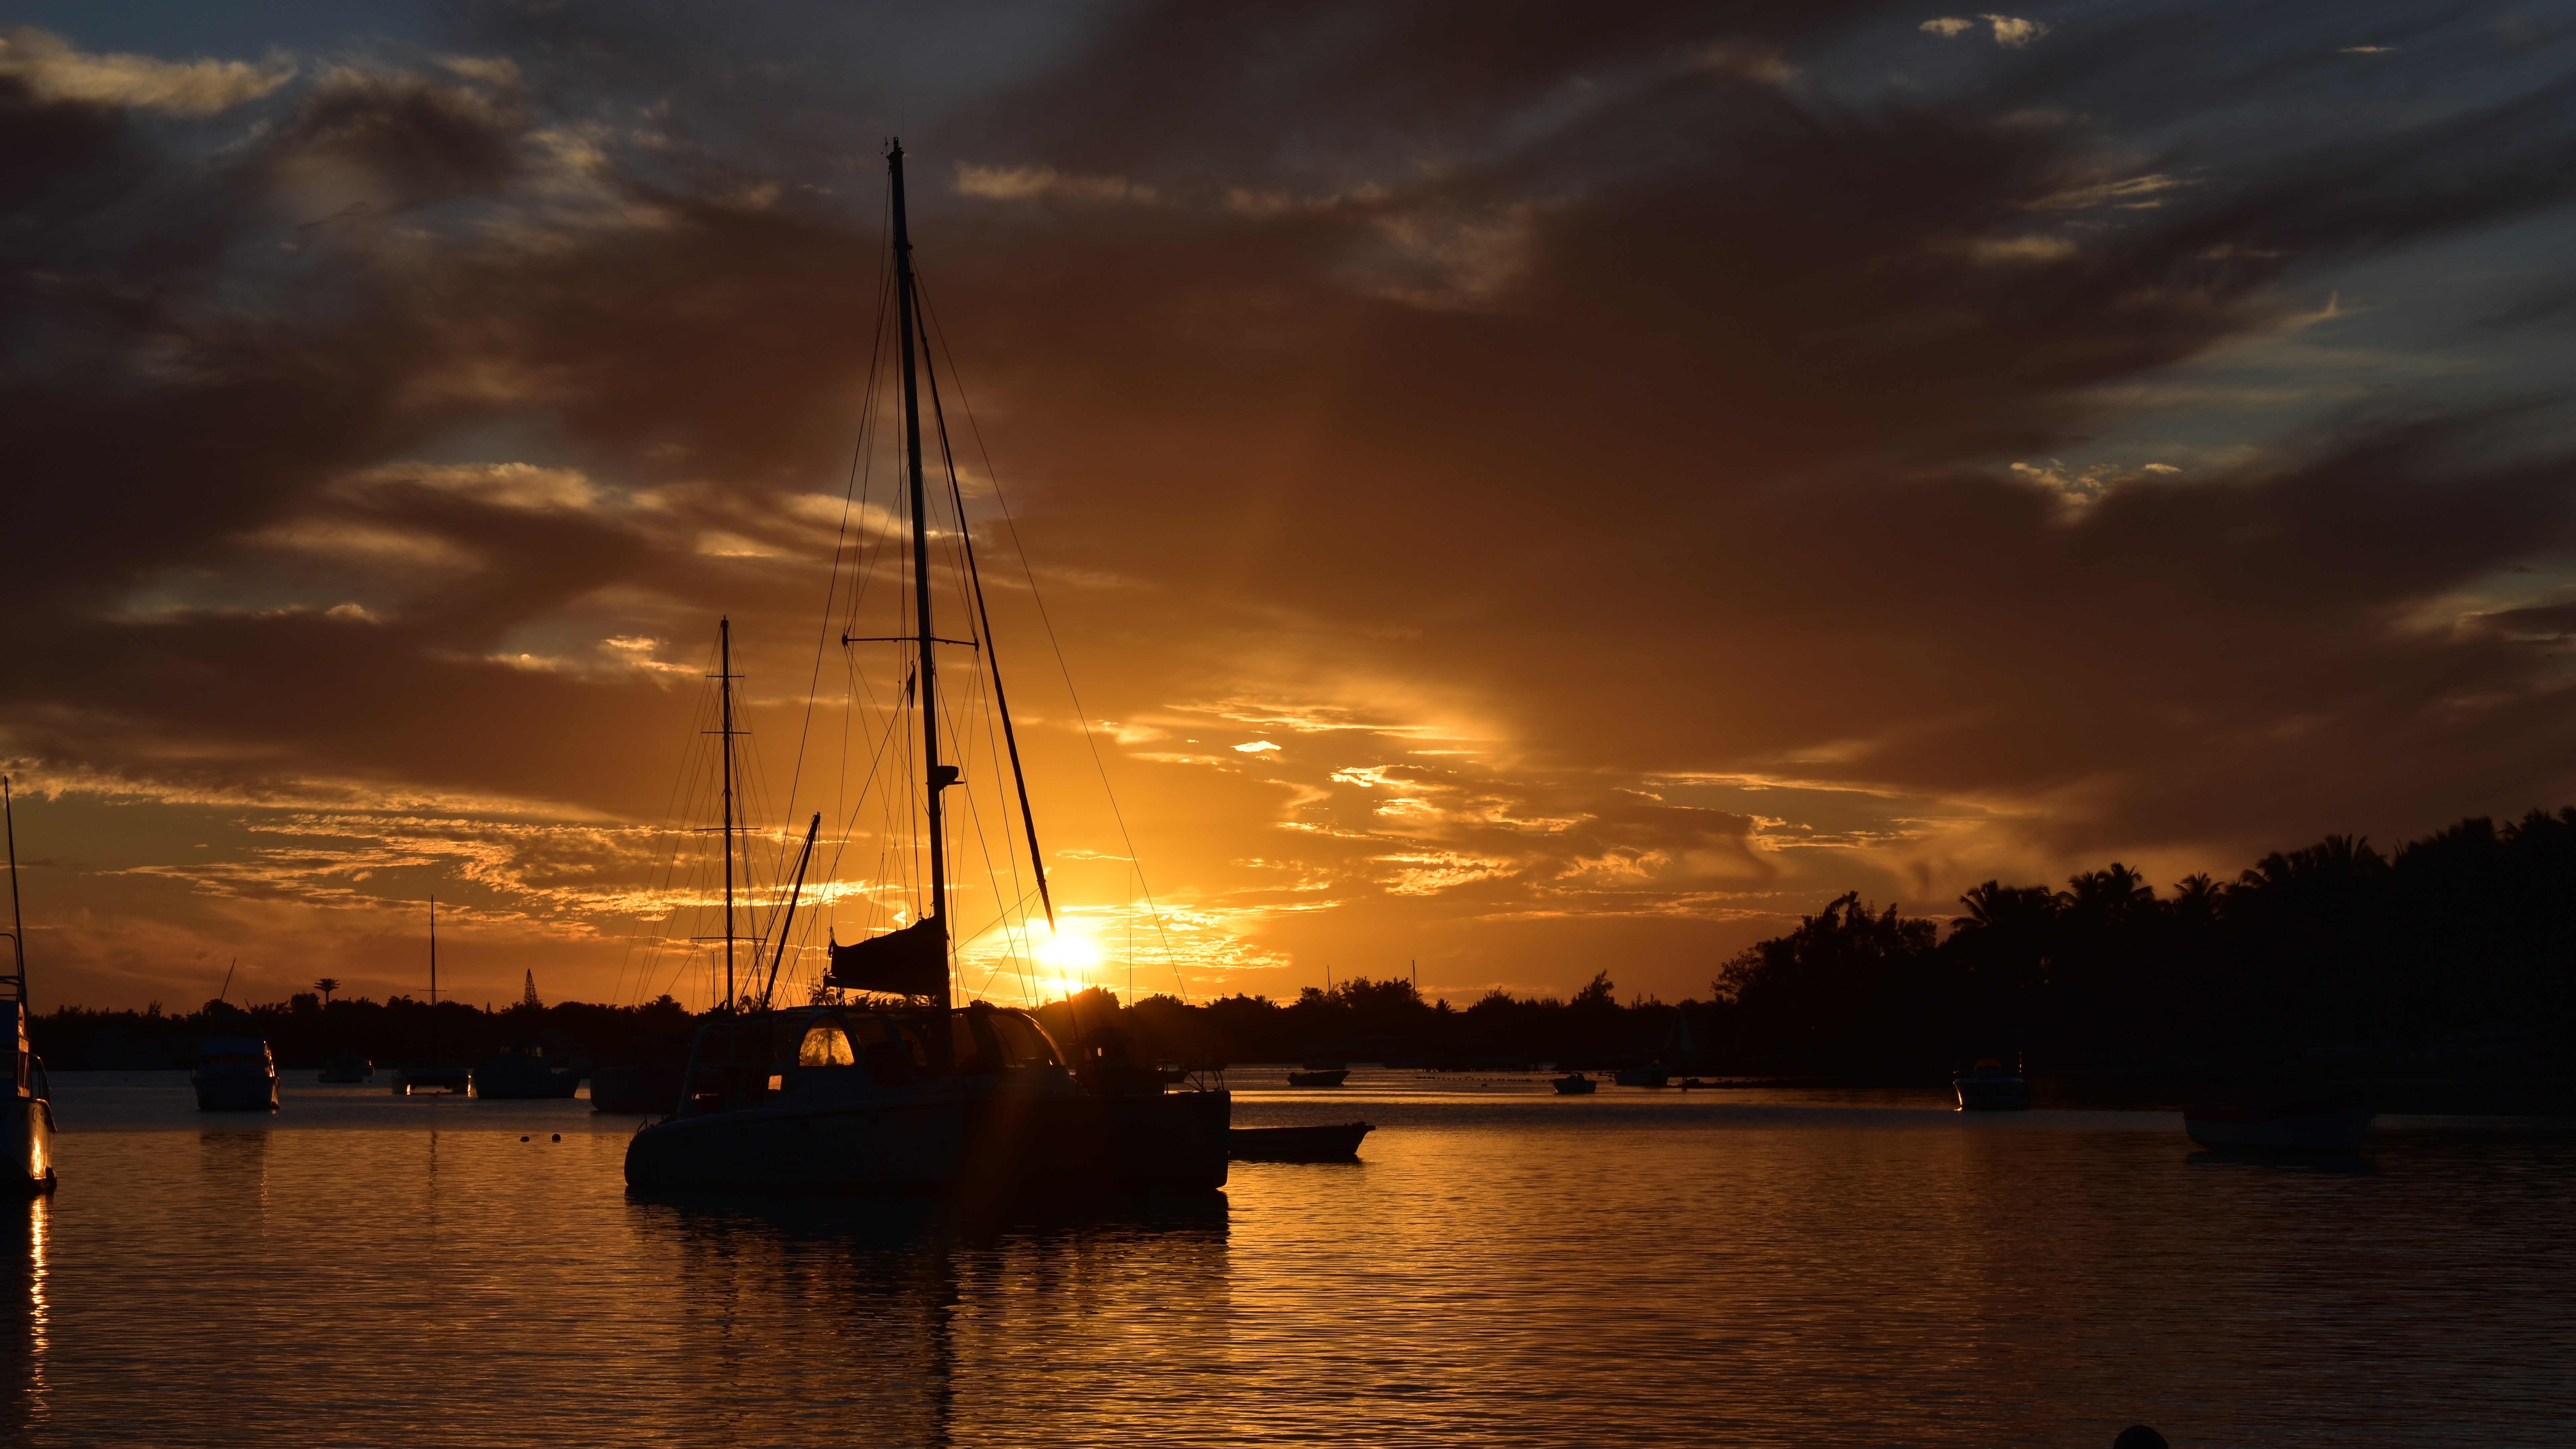 General 7680x4320 sailboats sunset silhouette nature water